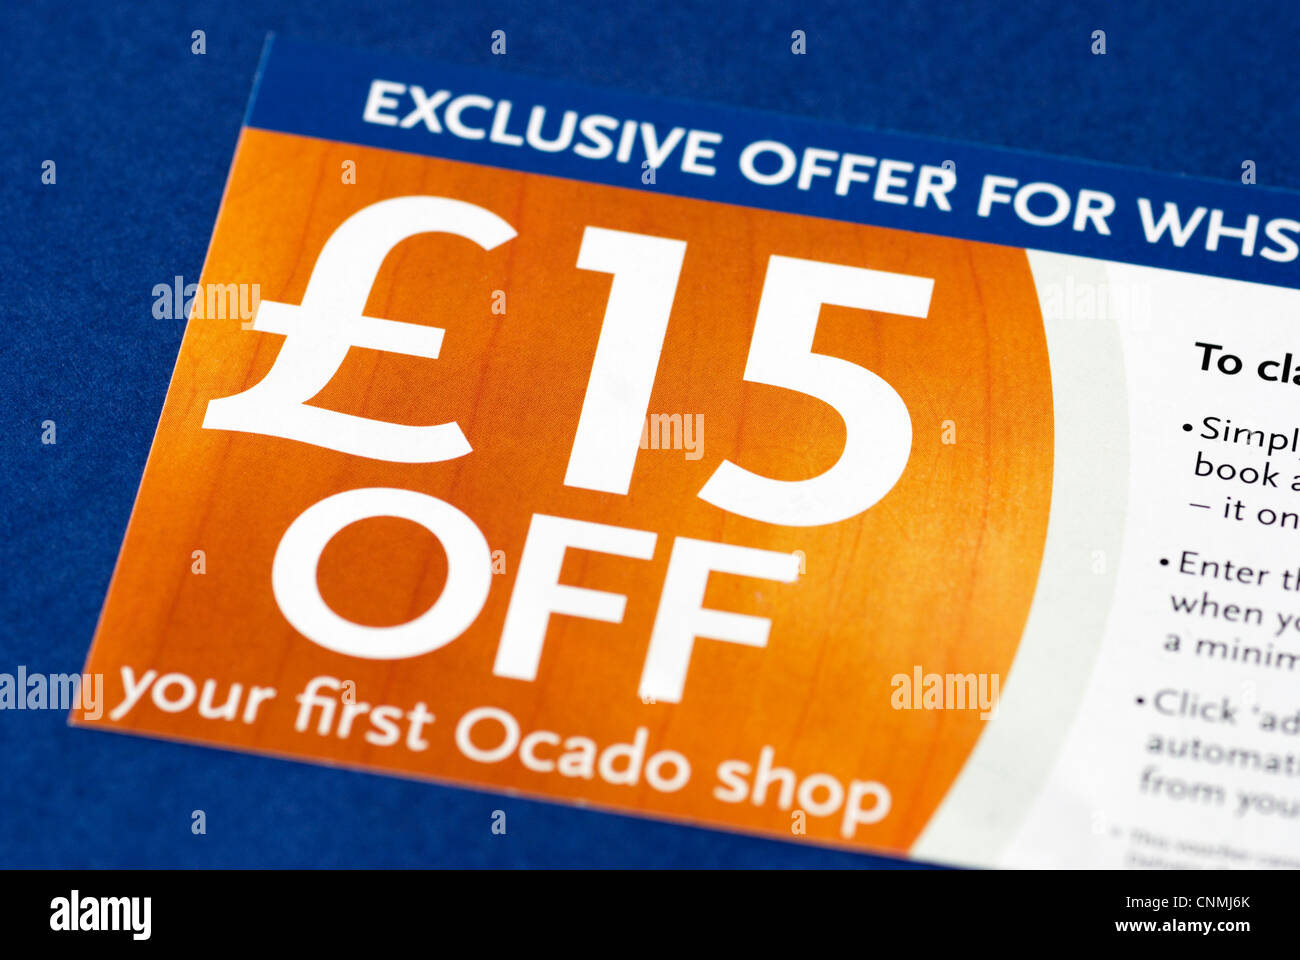 £15 off voucher for Ocado grocery delivery service Stock Photo